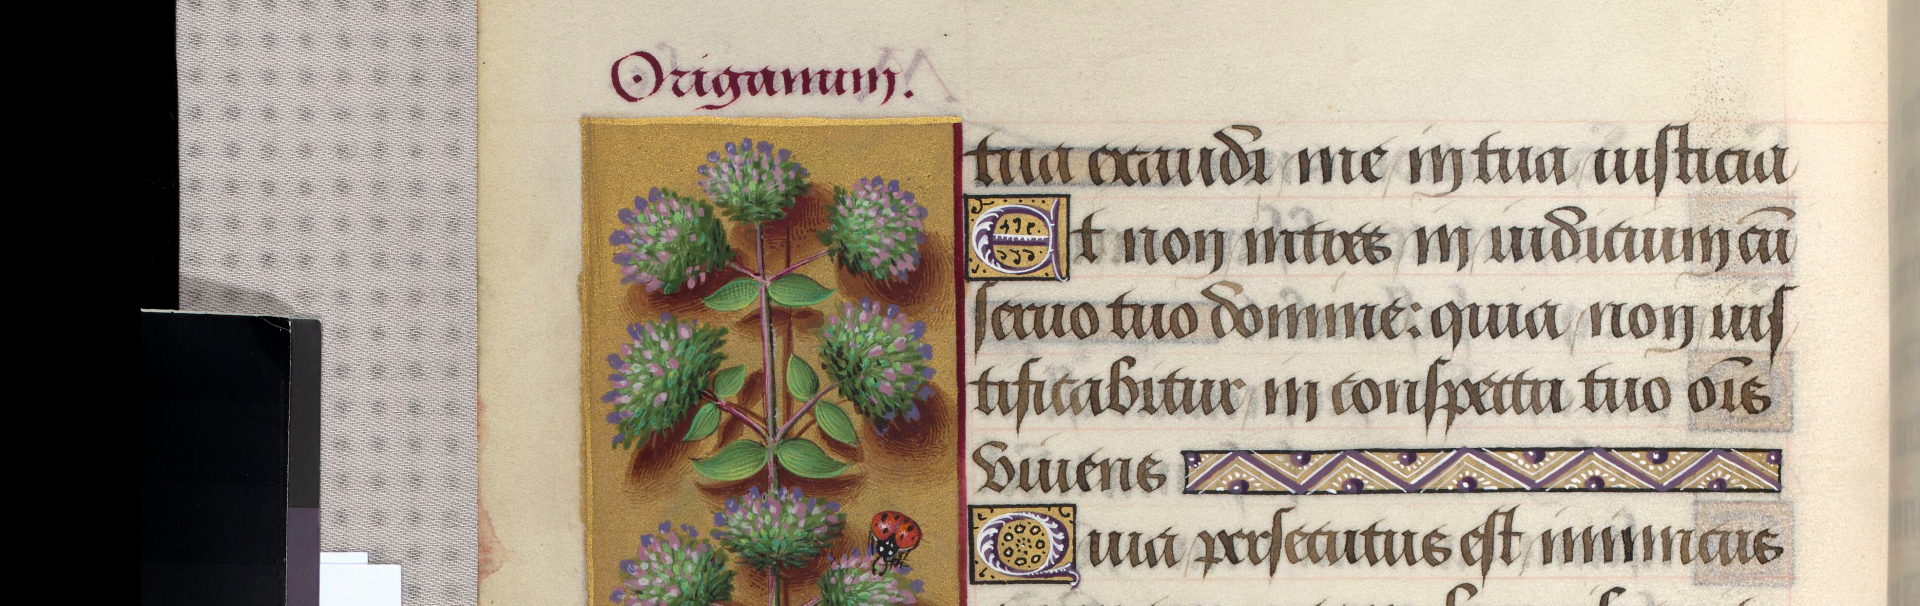 Psalms with an image of a origanum species with the Latin description „Origanum“ and a lady bug.